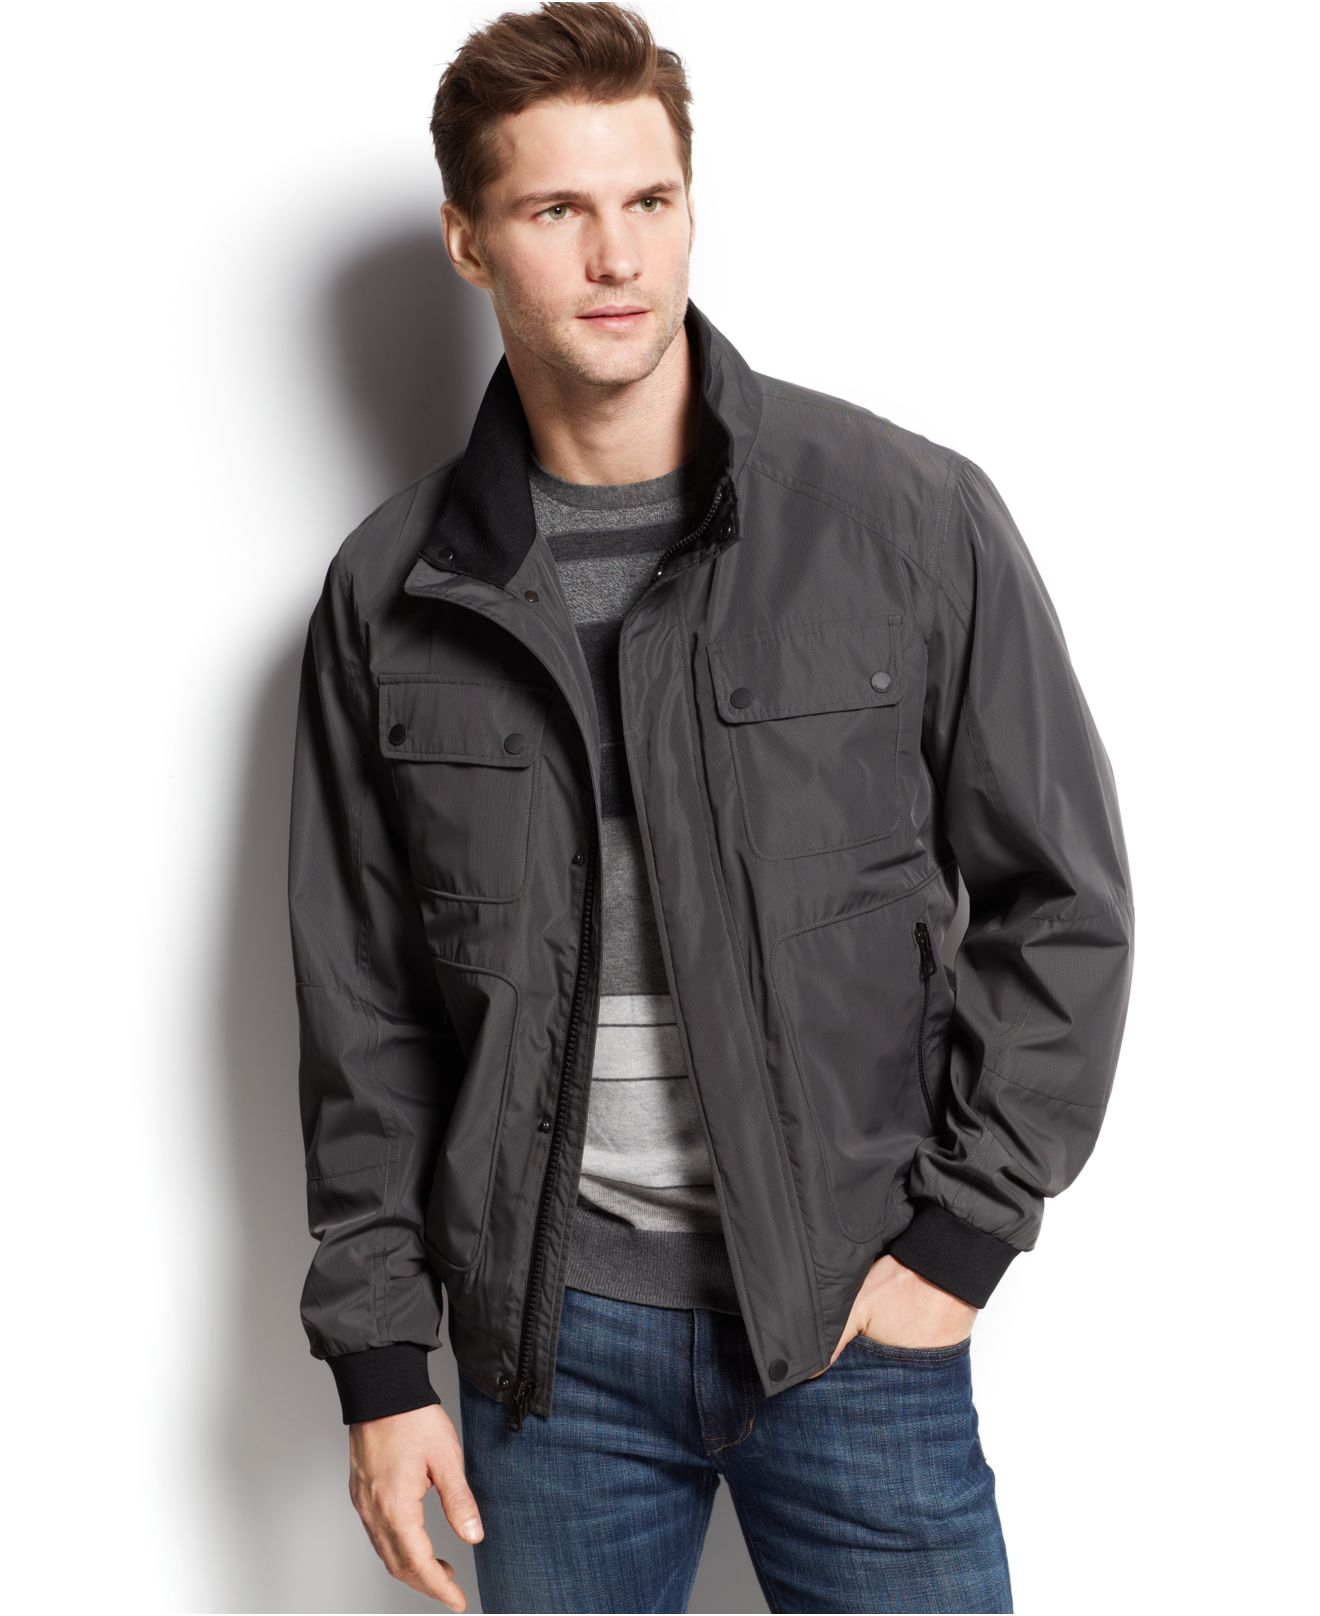 Lyst - Calvin Klein Micro-Checked Bomber Jacket in Gray for Men